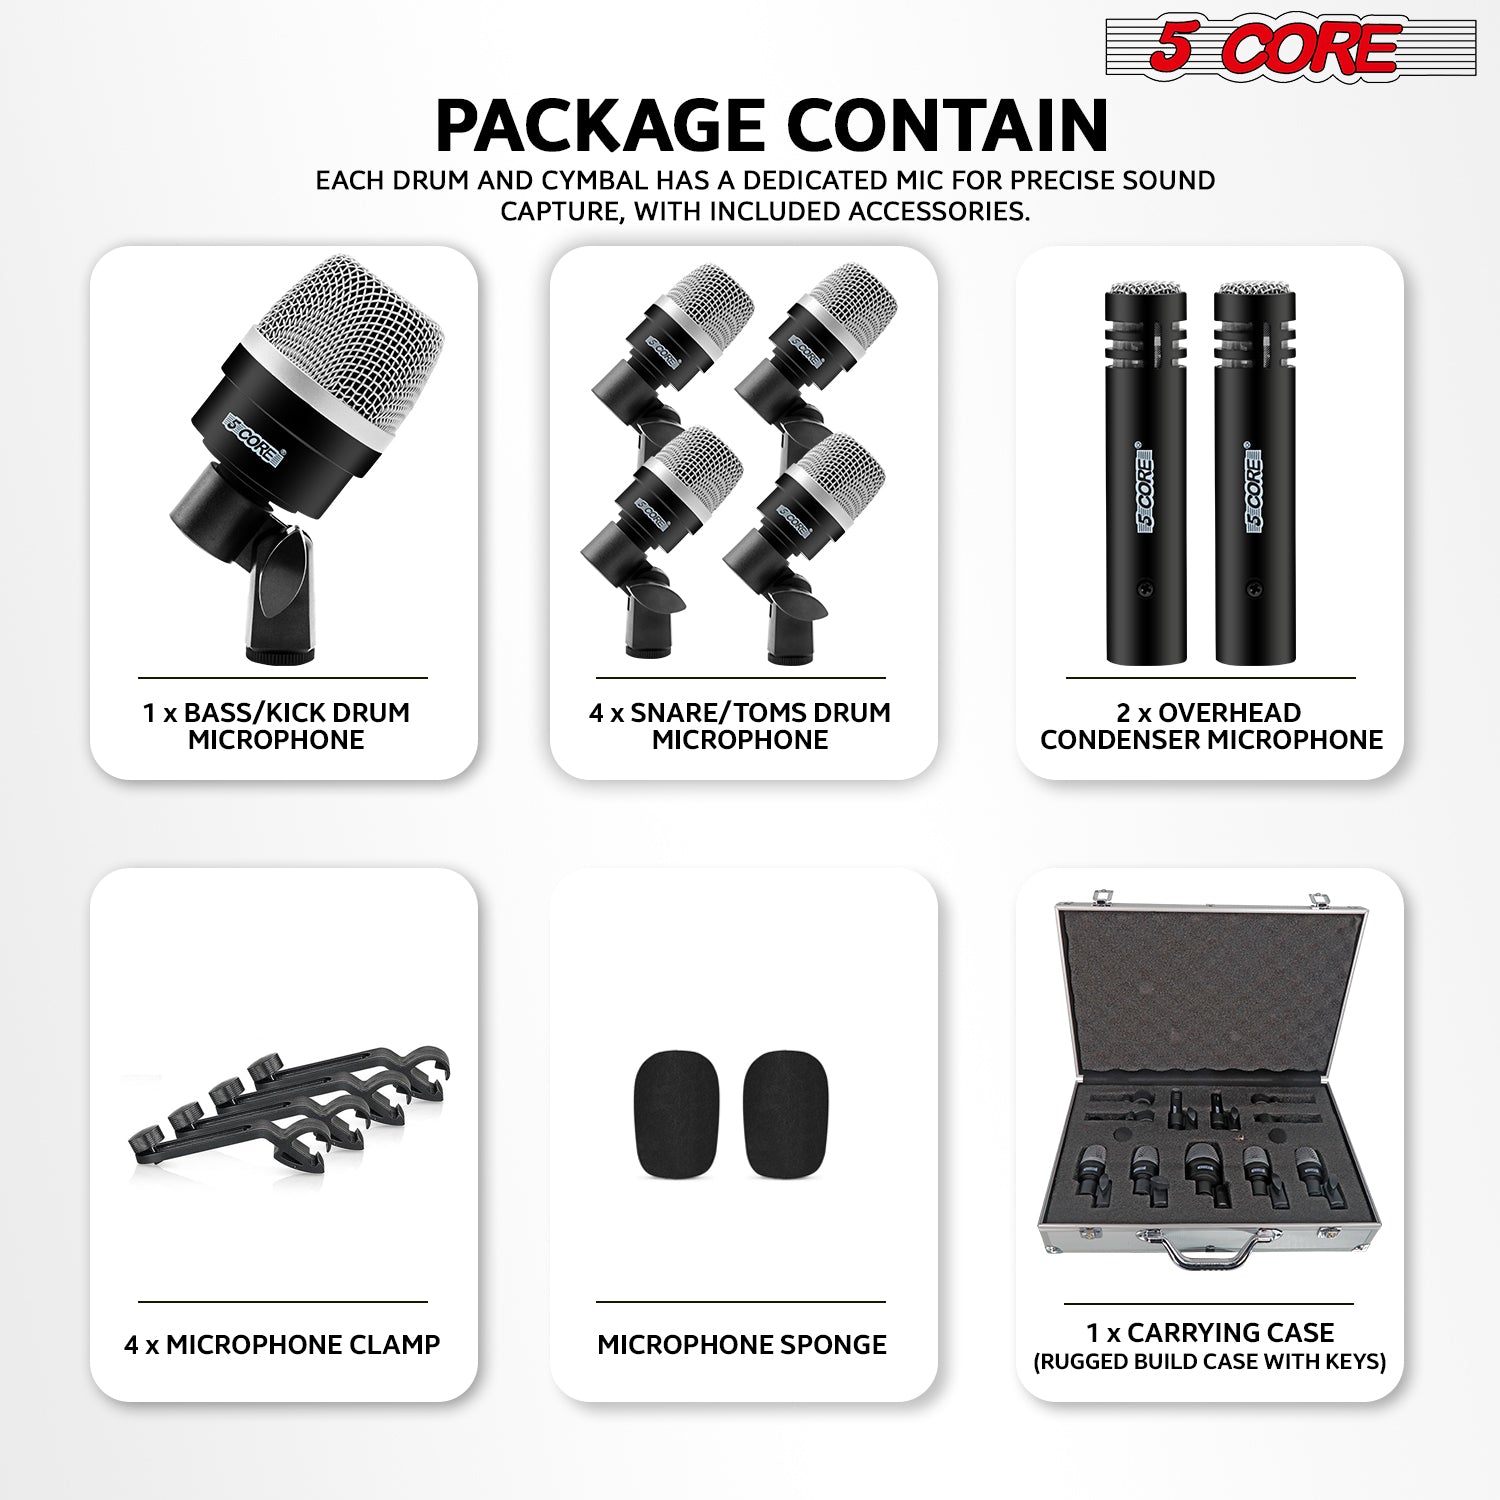 Dynamic XLR microphone collection offering precise audio reproduction for drummers.